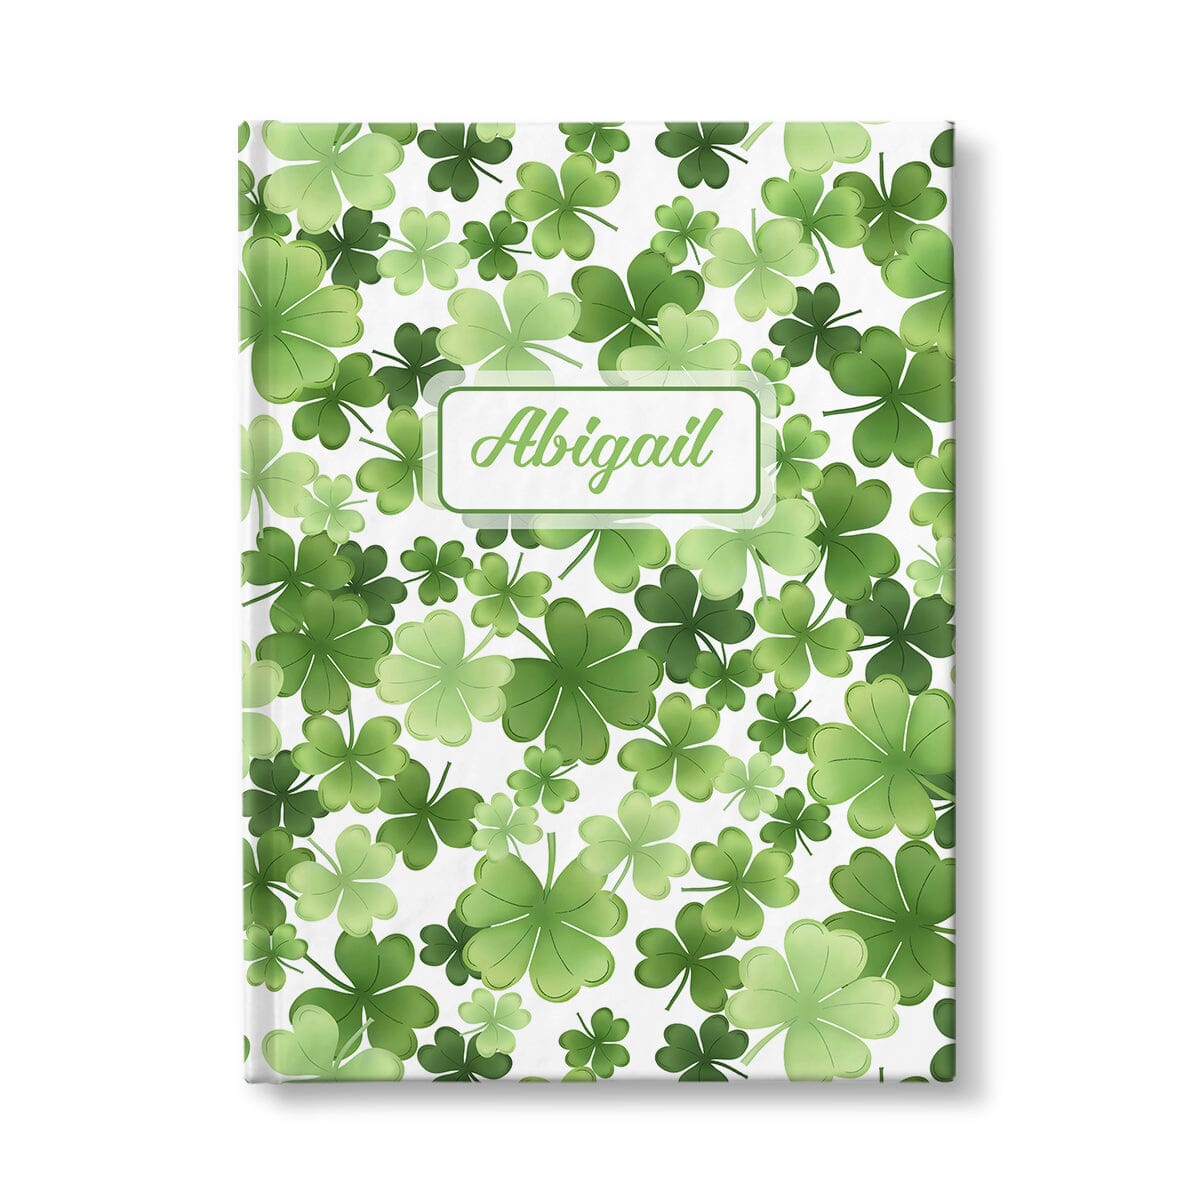 Personalized Shamrocks and 4-Leaf Clovers Journal at Artistically Invited.